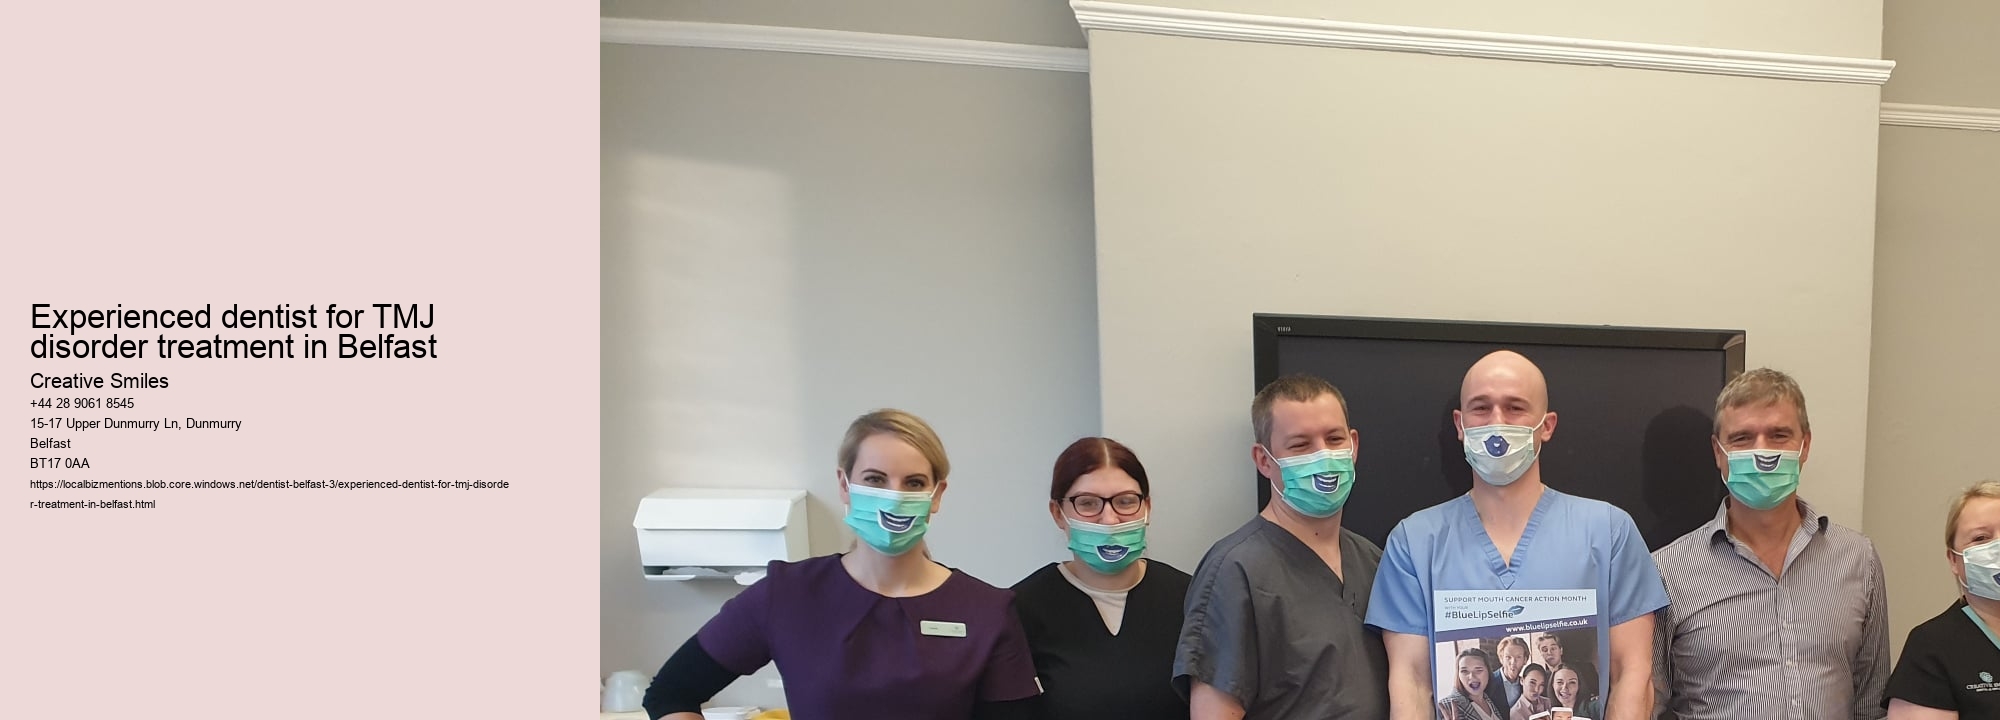 Experienced dentist for TMJ disorder treatment in Belfast